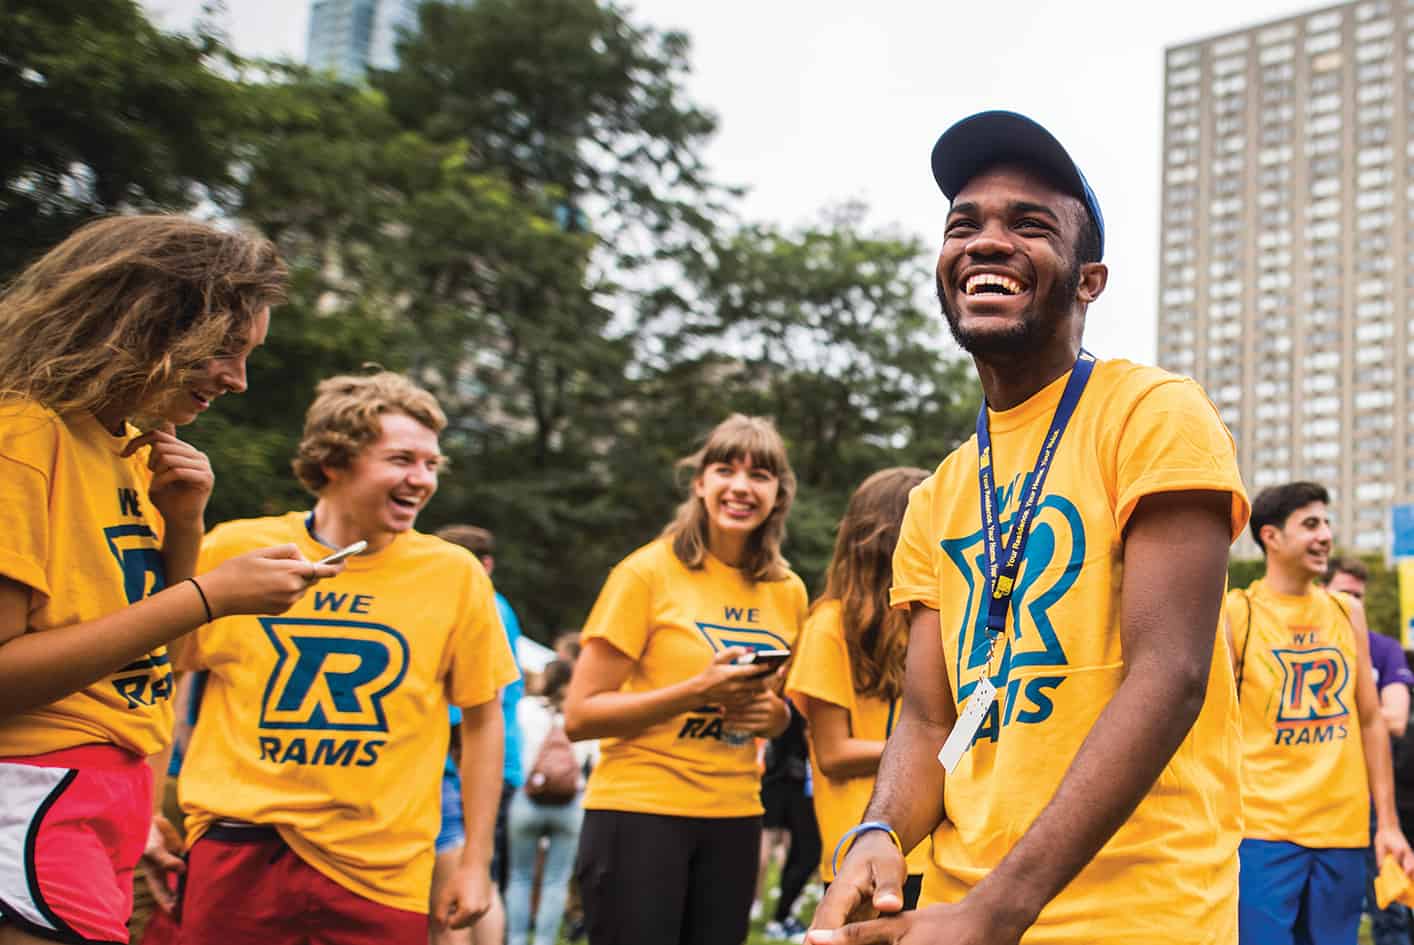 a group of students wearing we R rams shirts and smiling